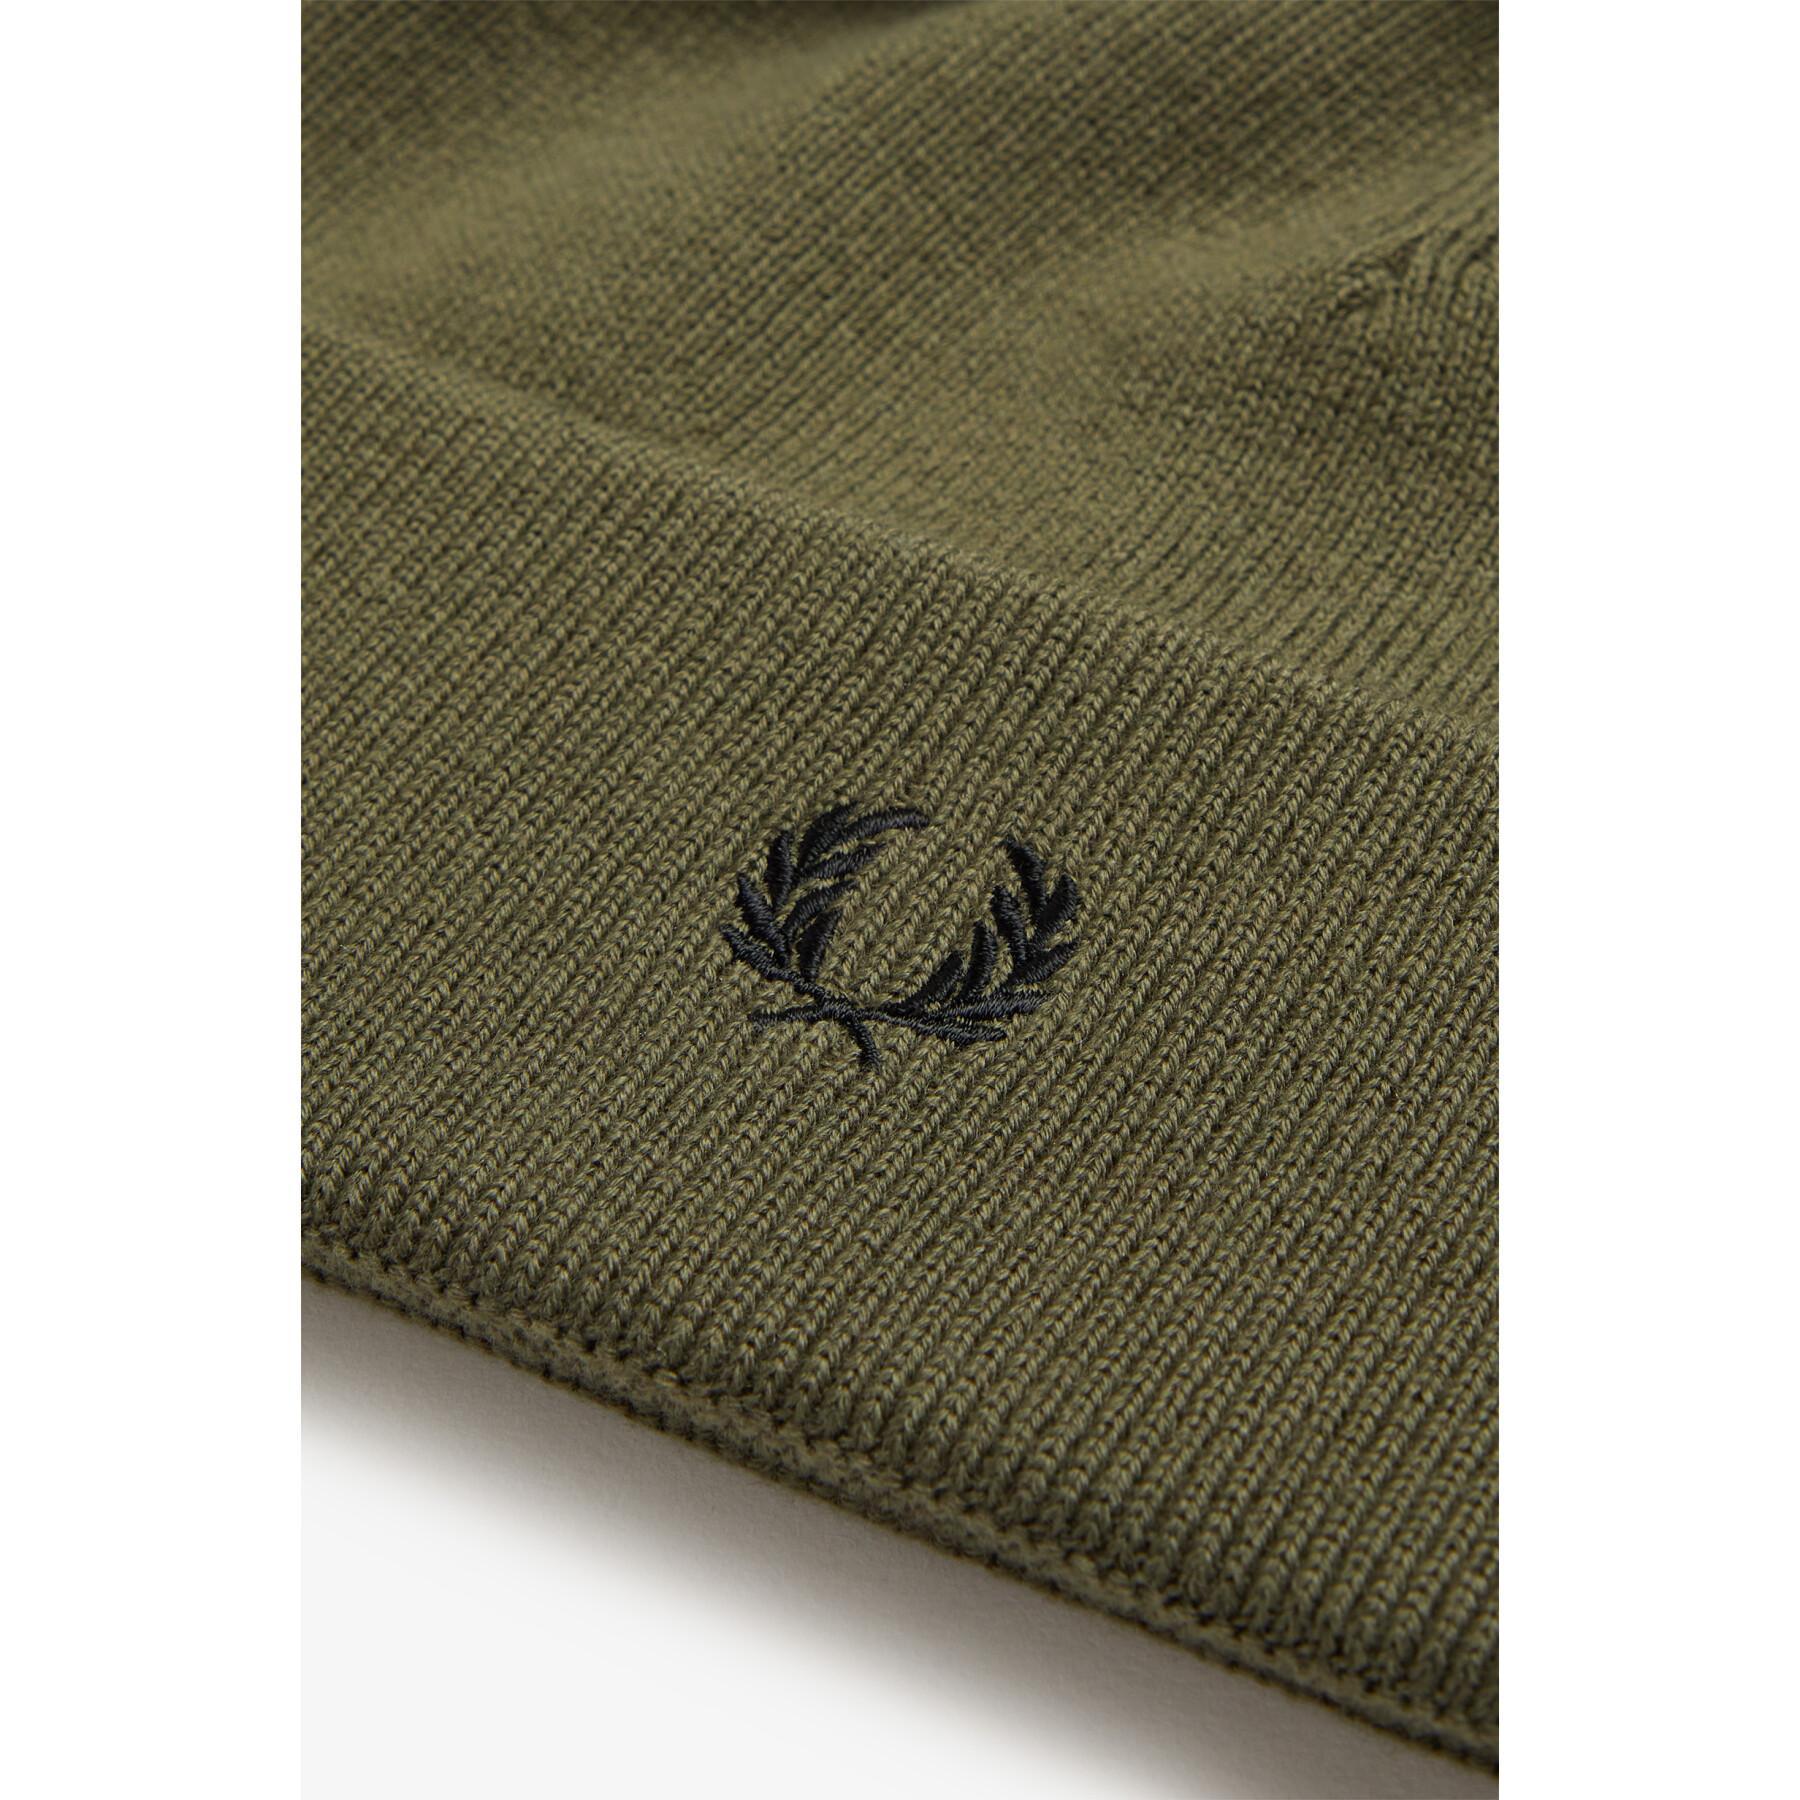 Cappello Fred Perry Merino Wool